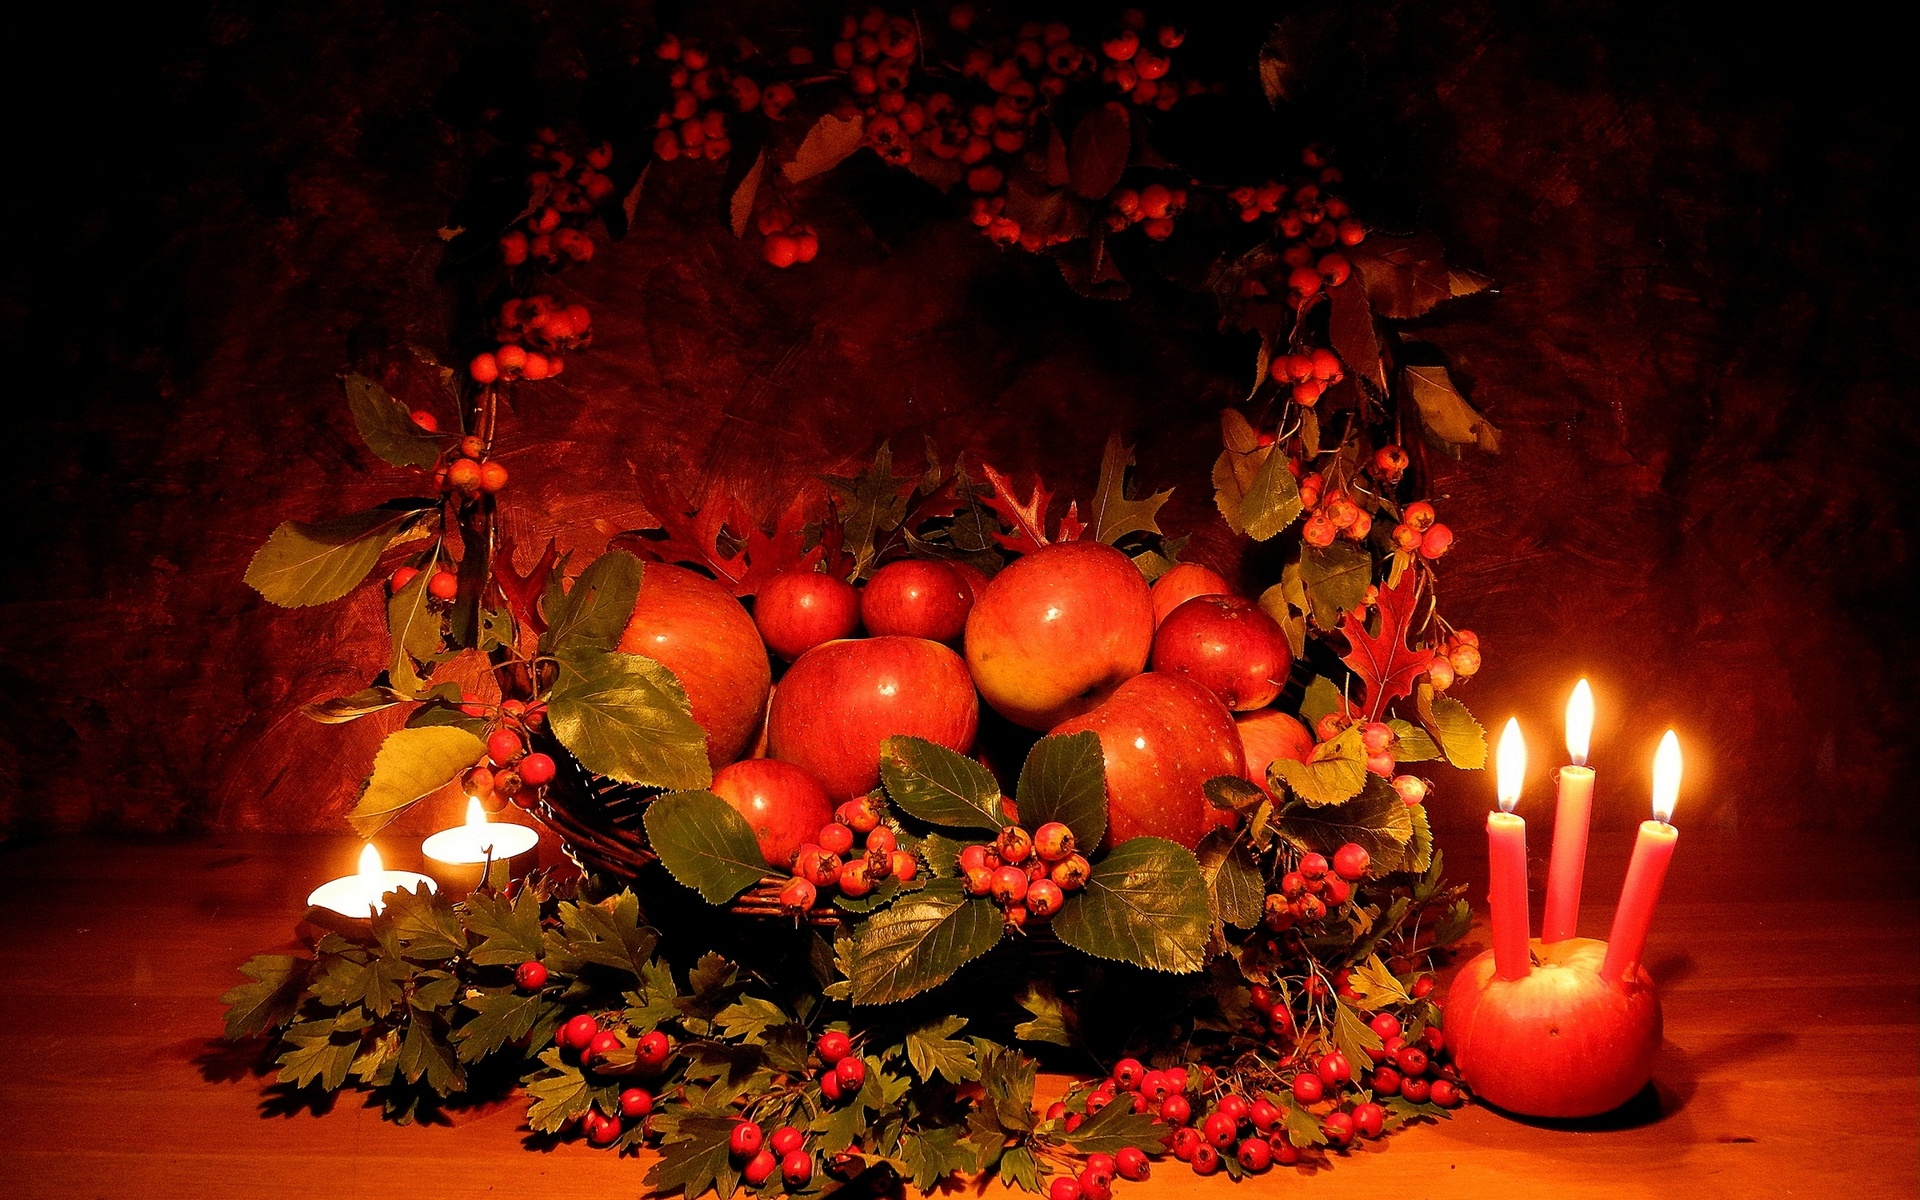 apples, Hawthorn, Candles, Basket, Composition, Thanksgiving Wallpaper